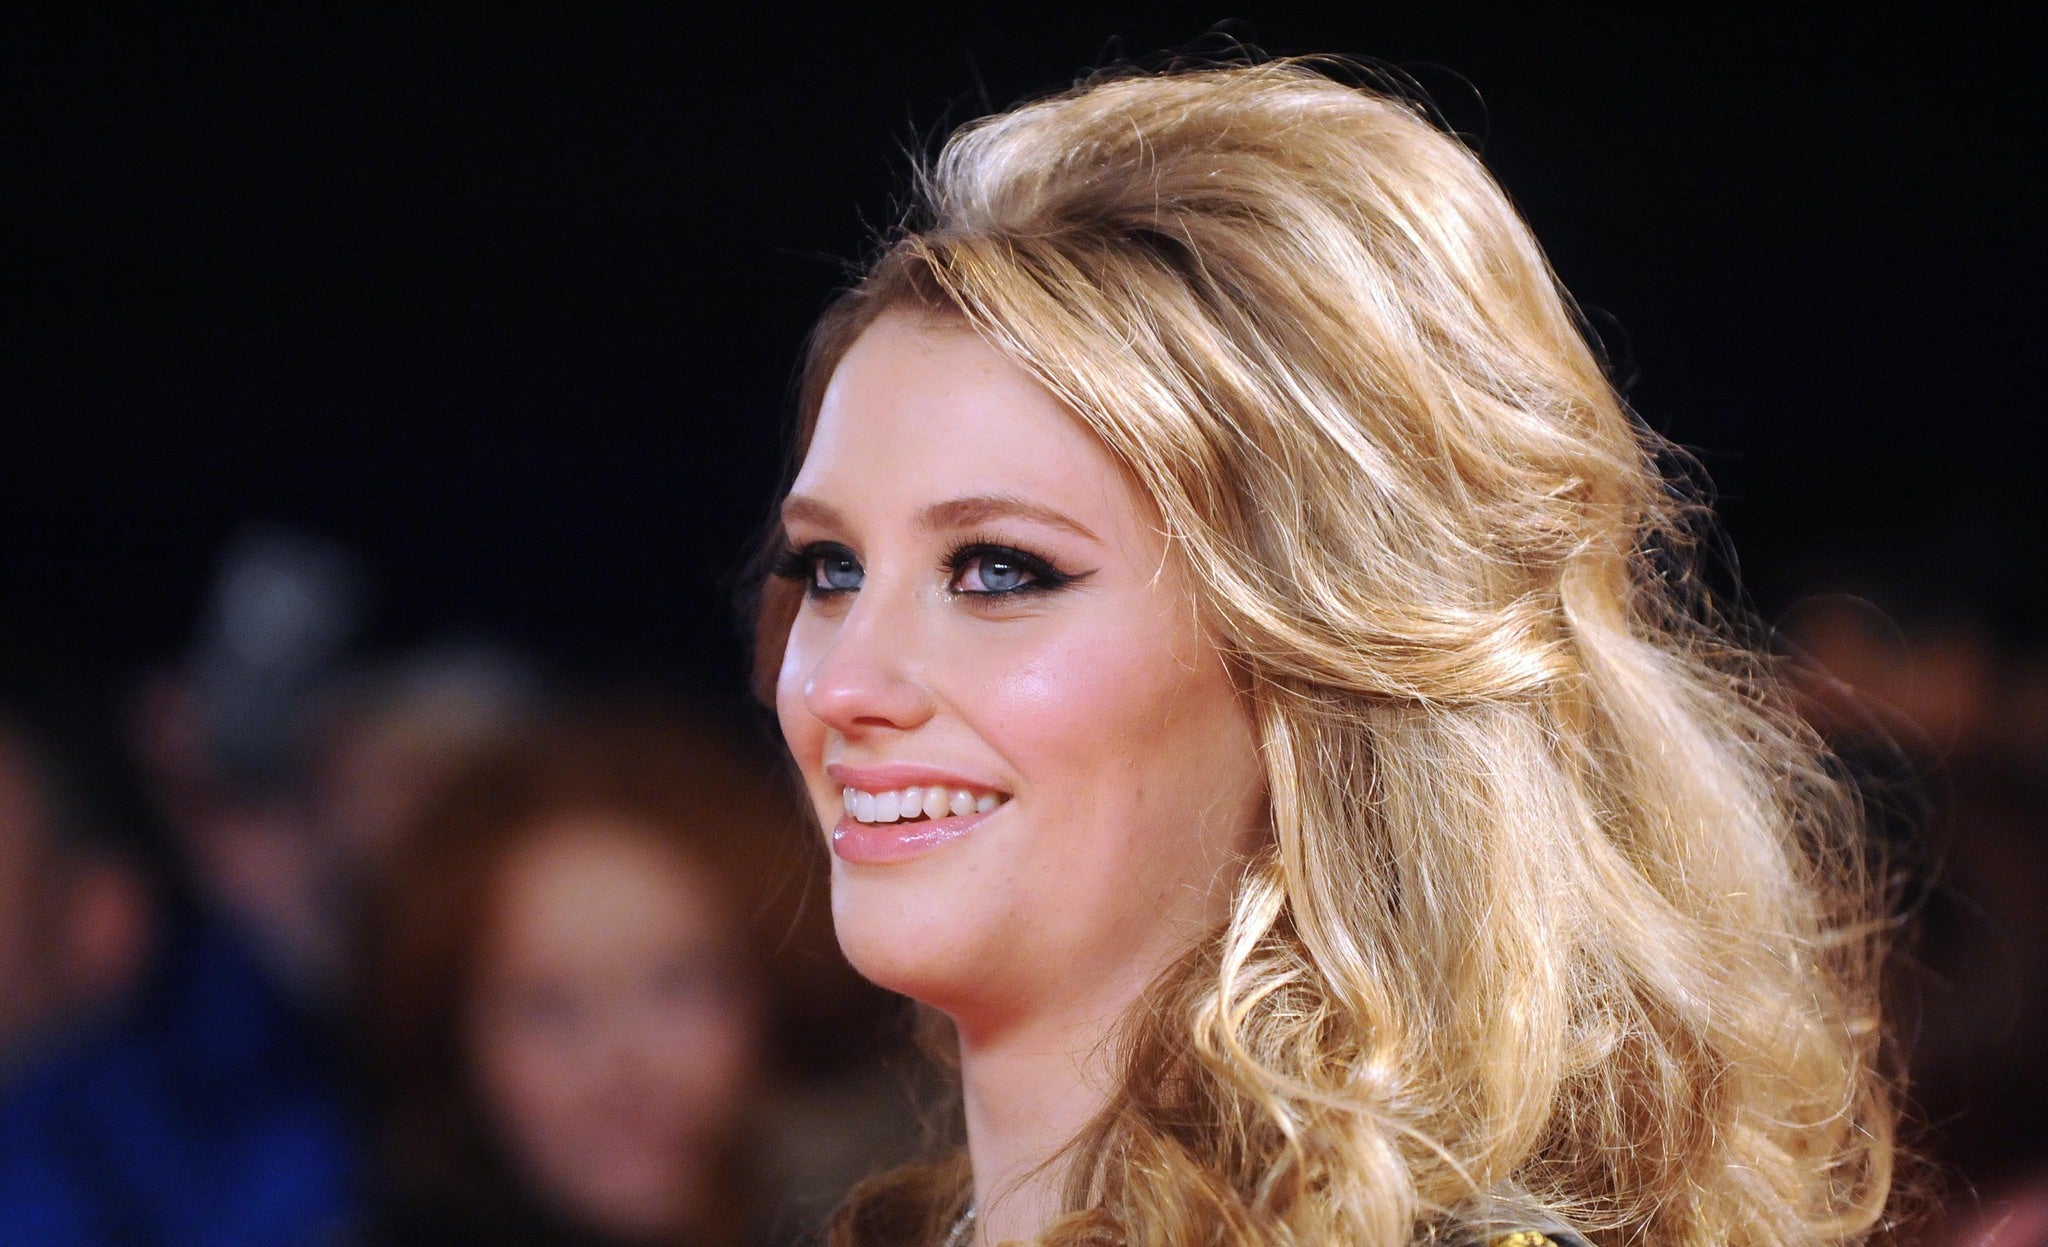 Ella Henderson's new single 'Ghosts' has gone straight in at number one in the UK charts